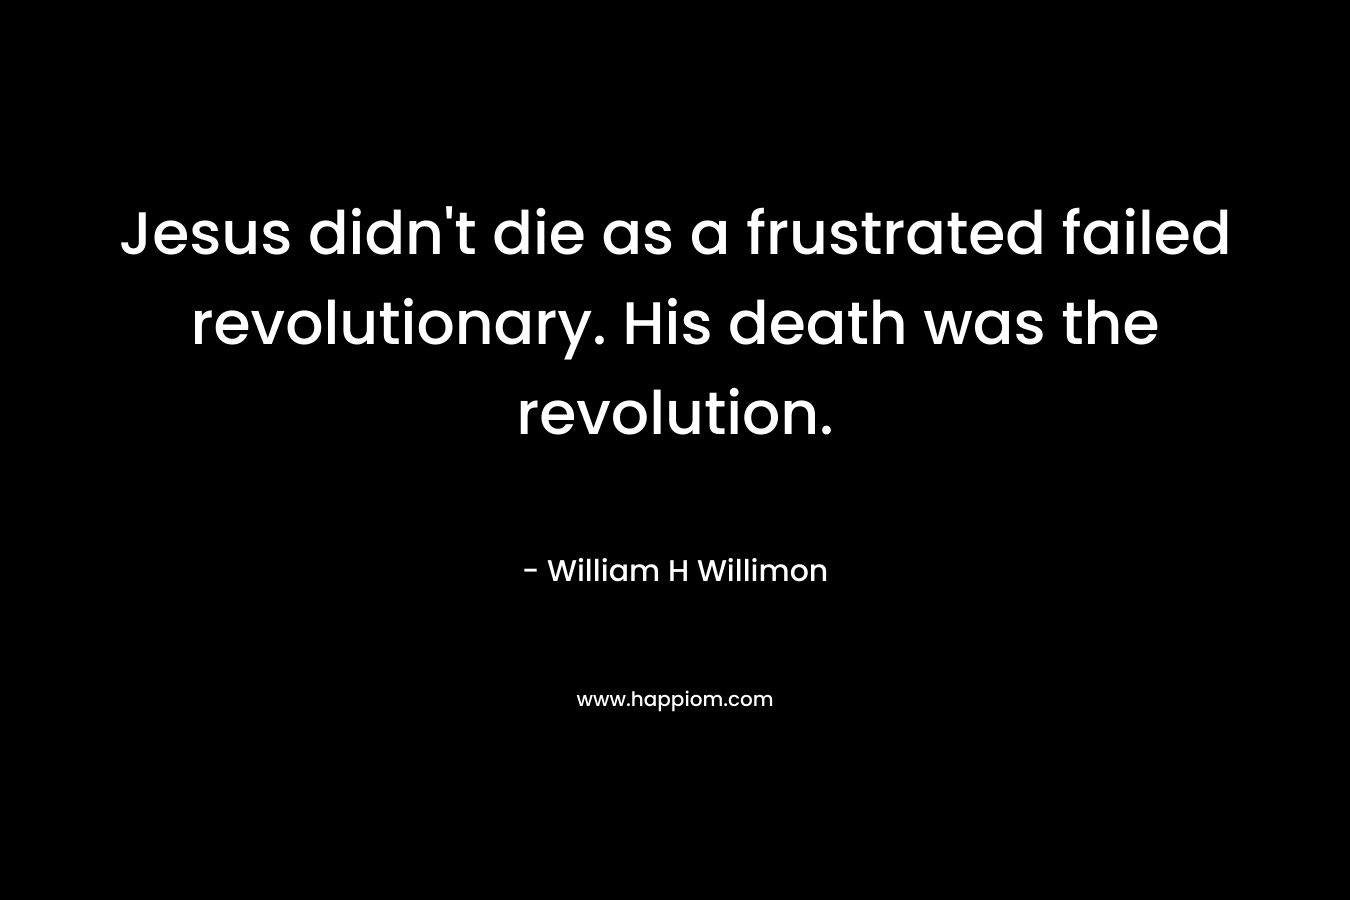 Jesus didn't die as a frustrated failed revolutionary. His death was the revolution.